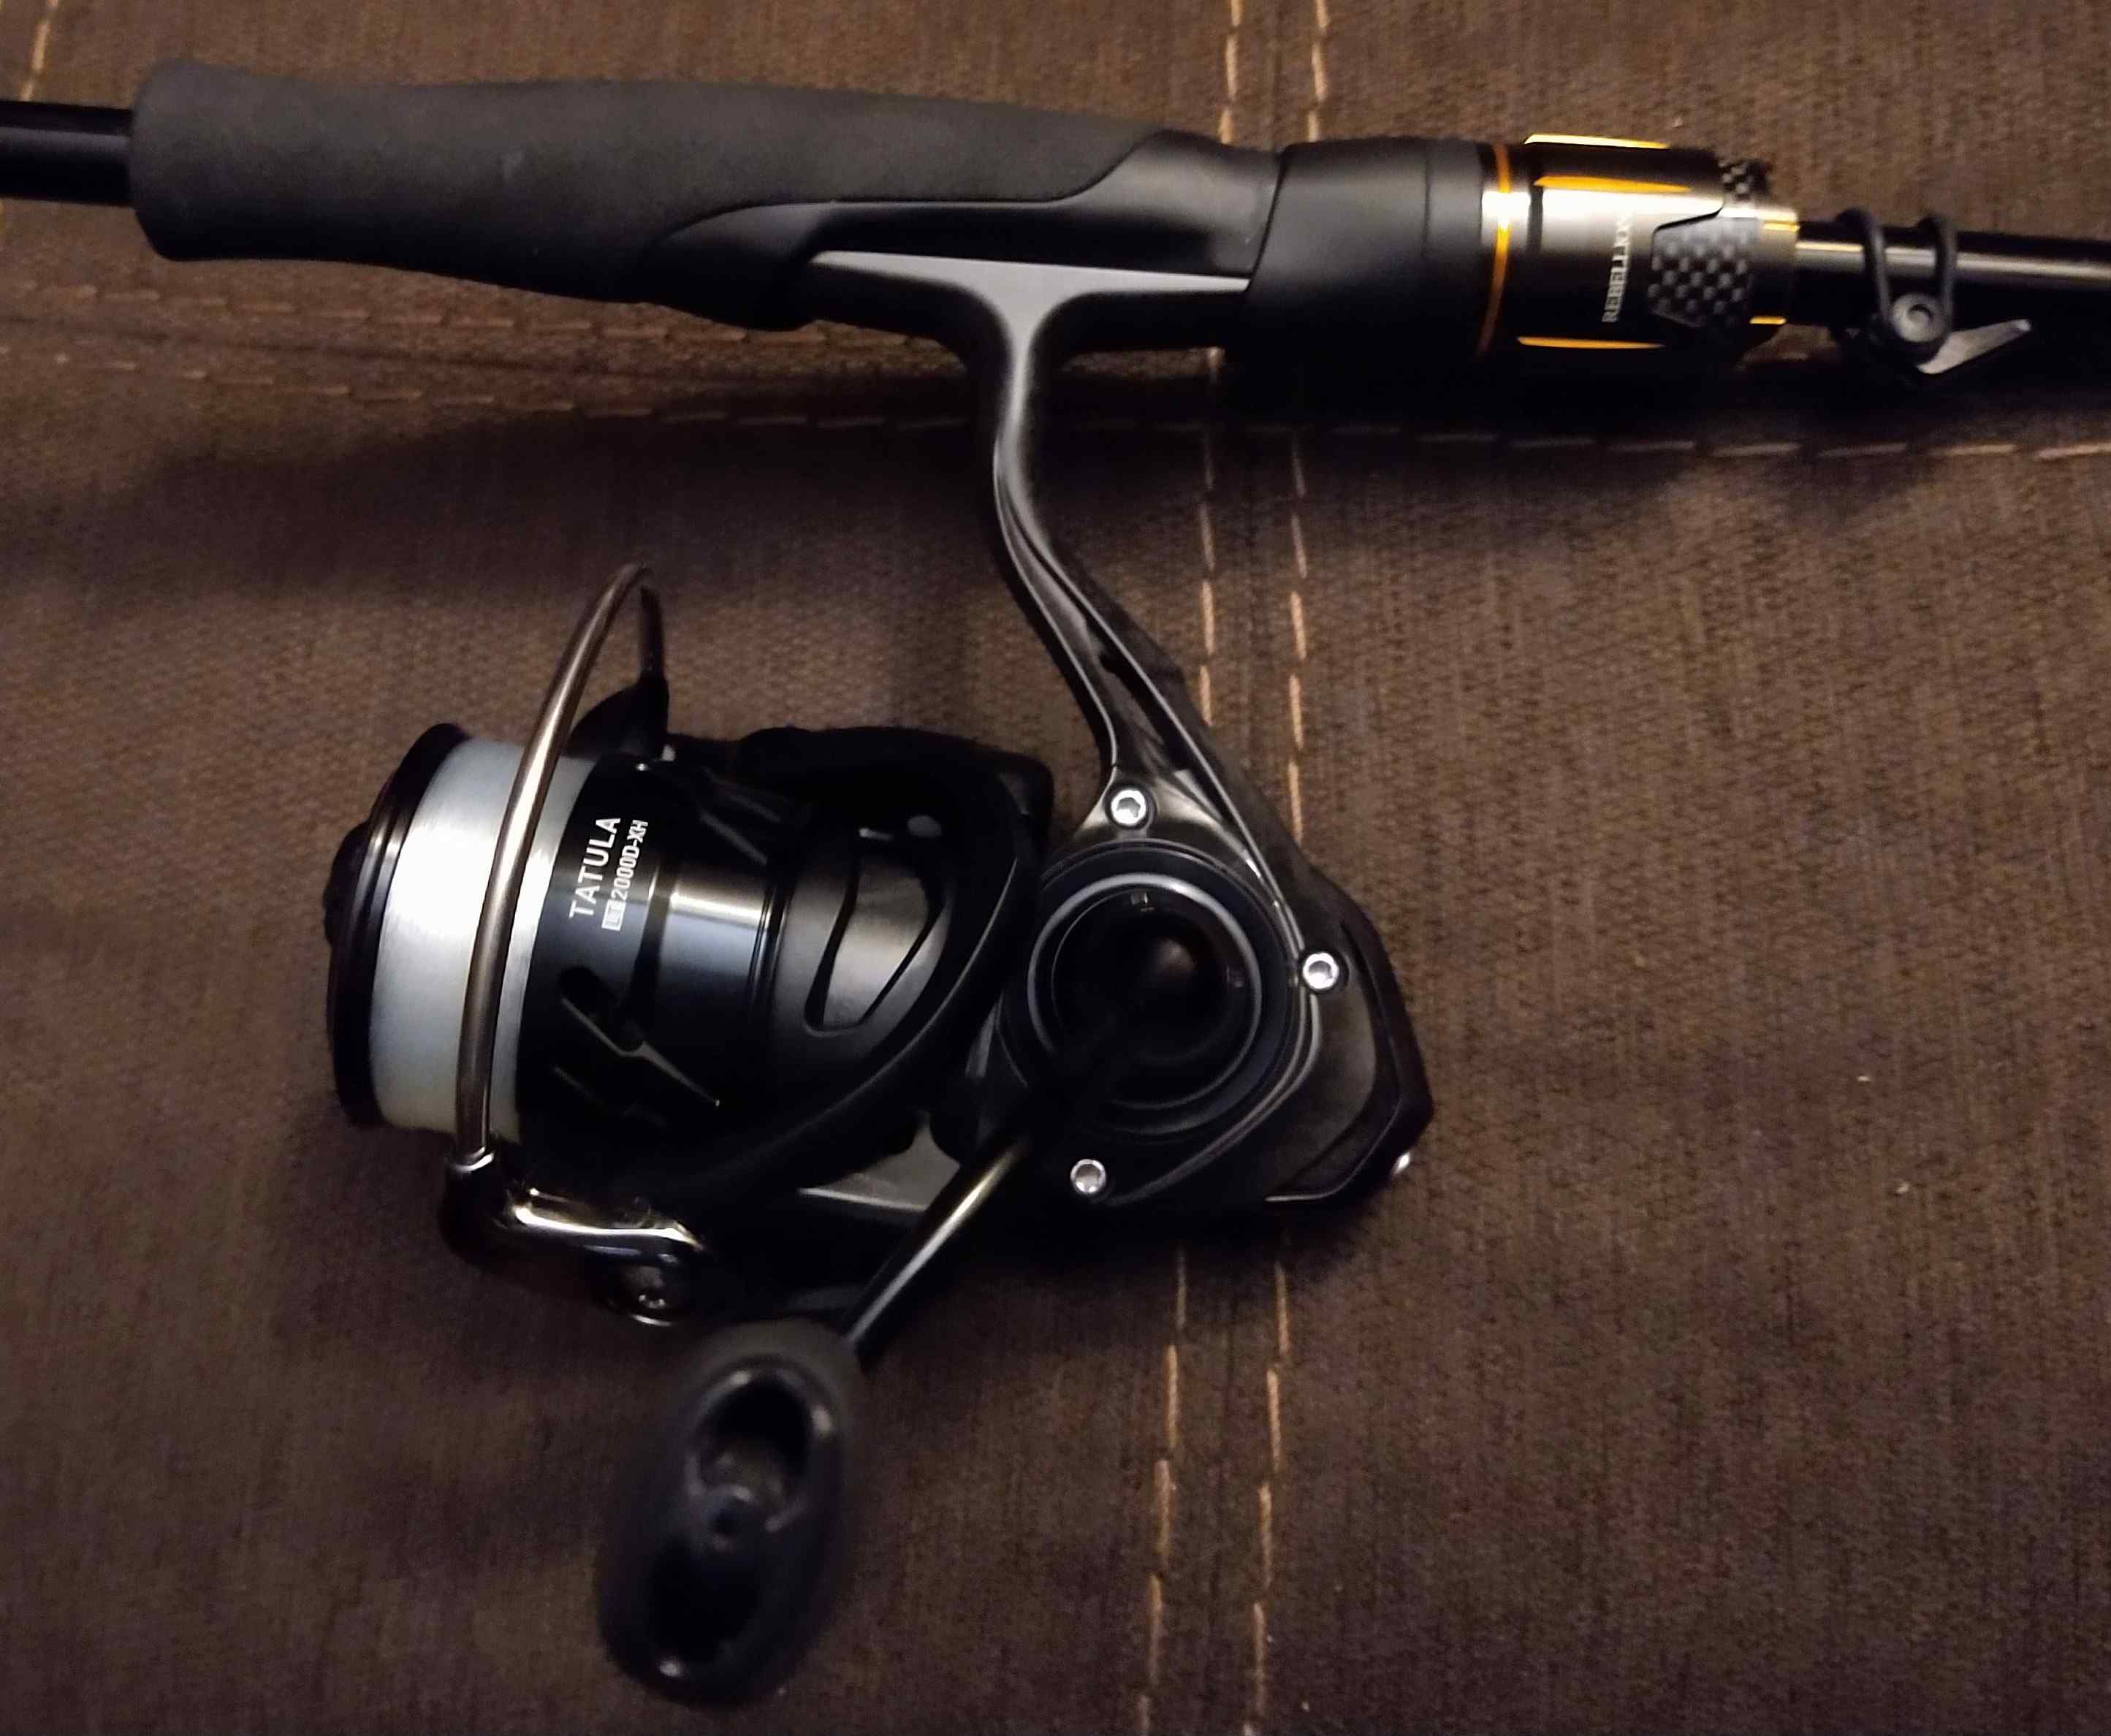 you all ever talk about Quantum reels? - Fishing Rods, Reels, Line